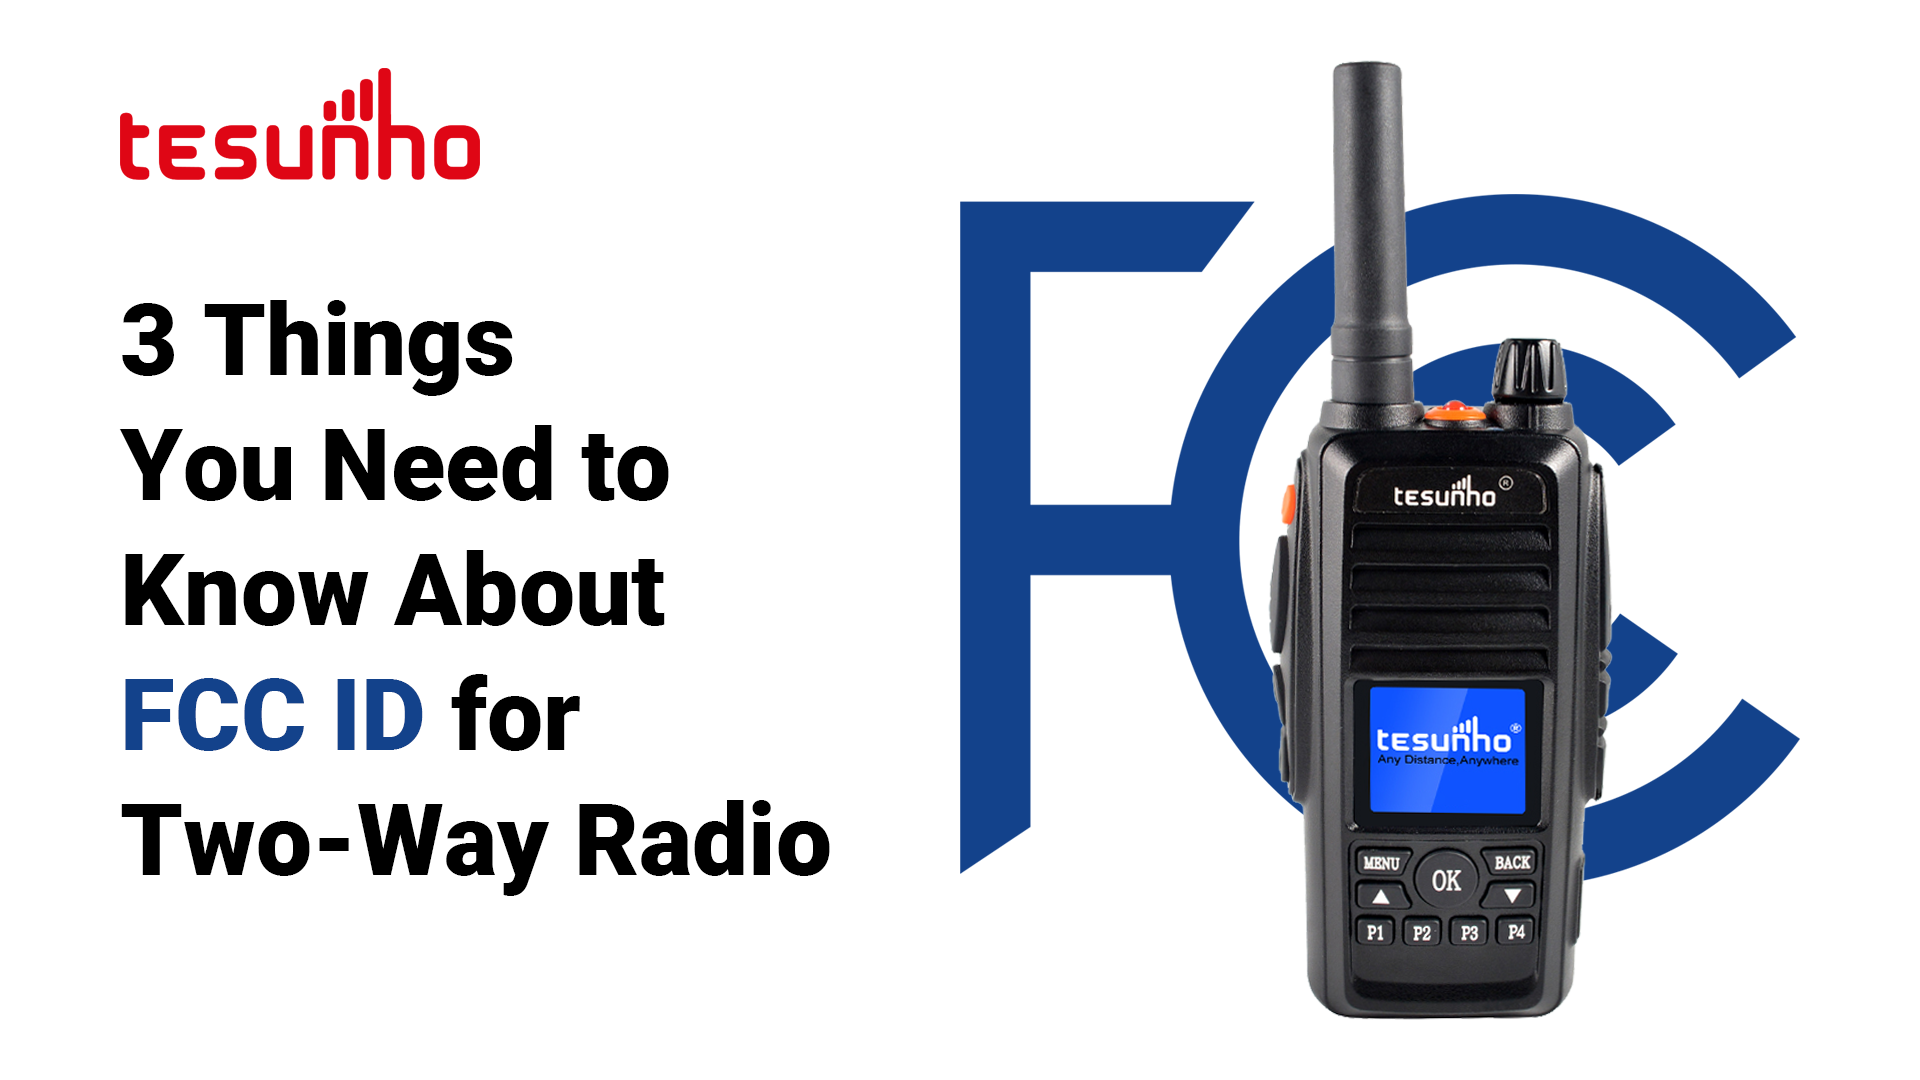 3 Things You Need to Know About FCC ID for Two-Way Radio